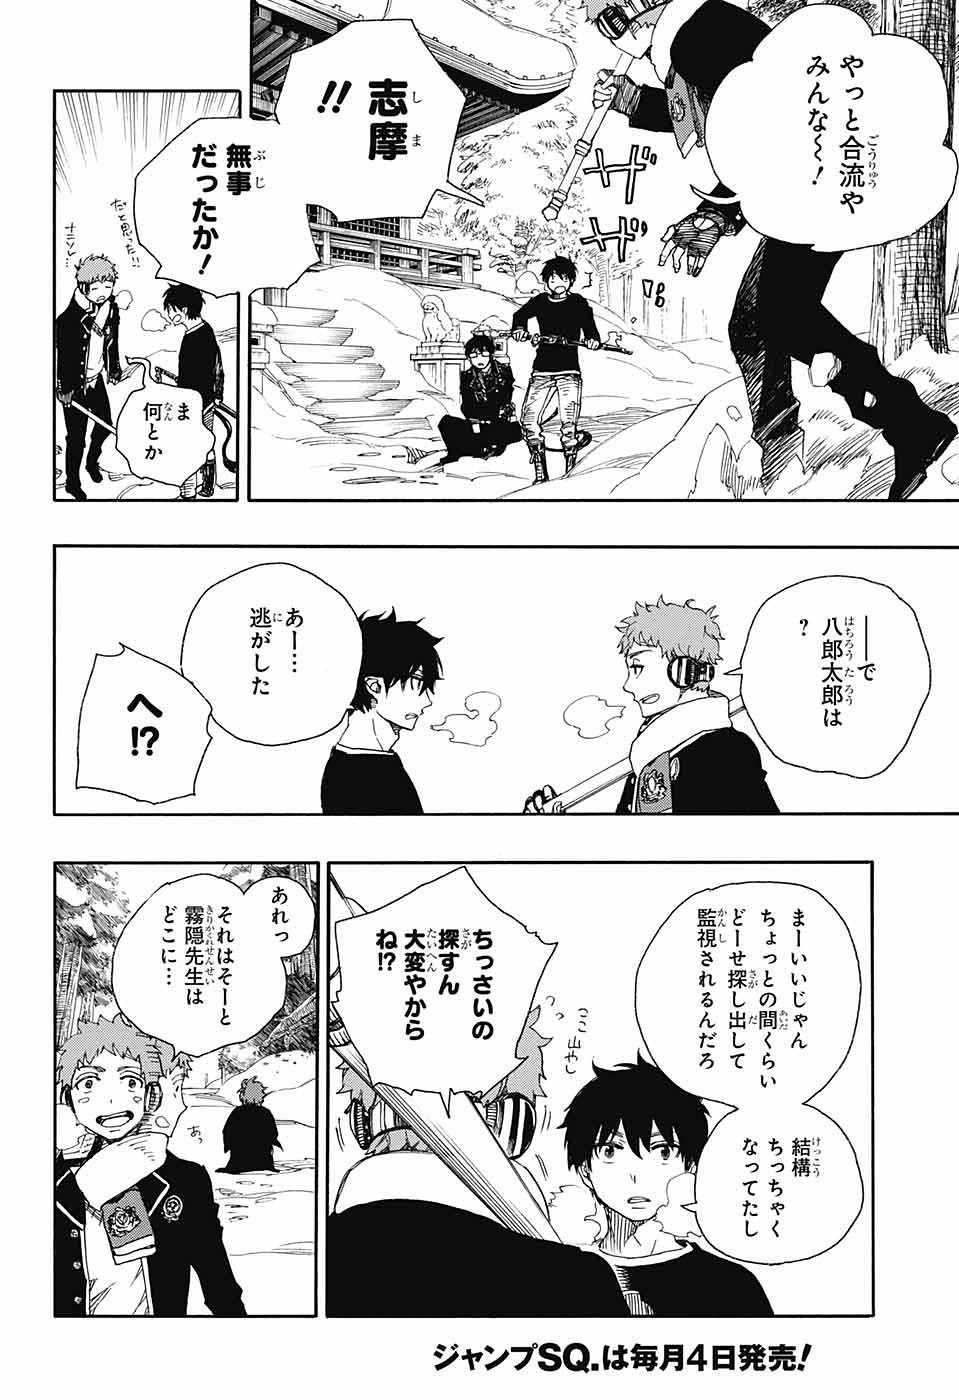 Ao no Exorcist - Chapter 80 - Page 6